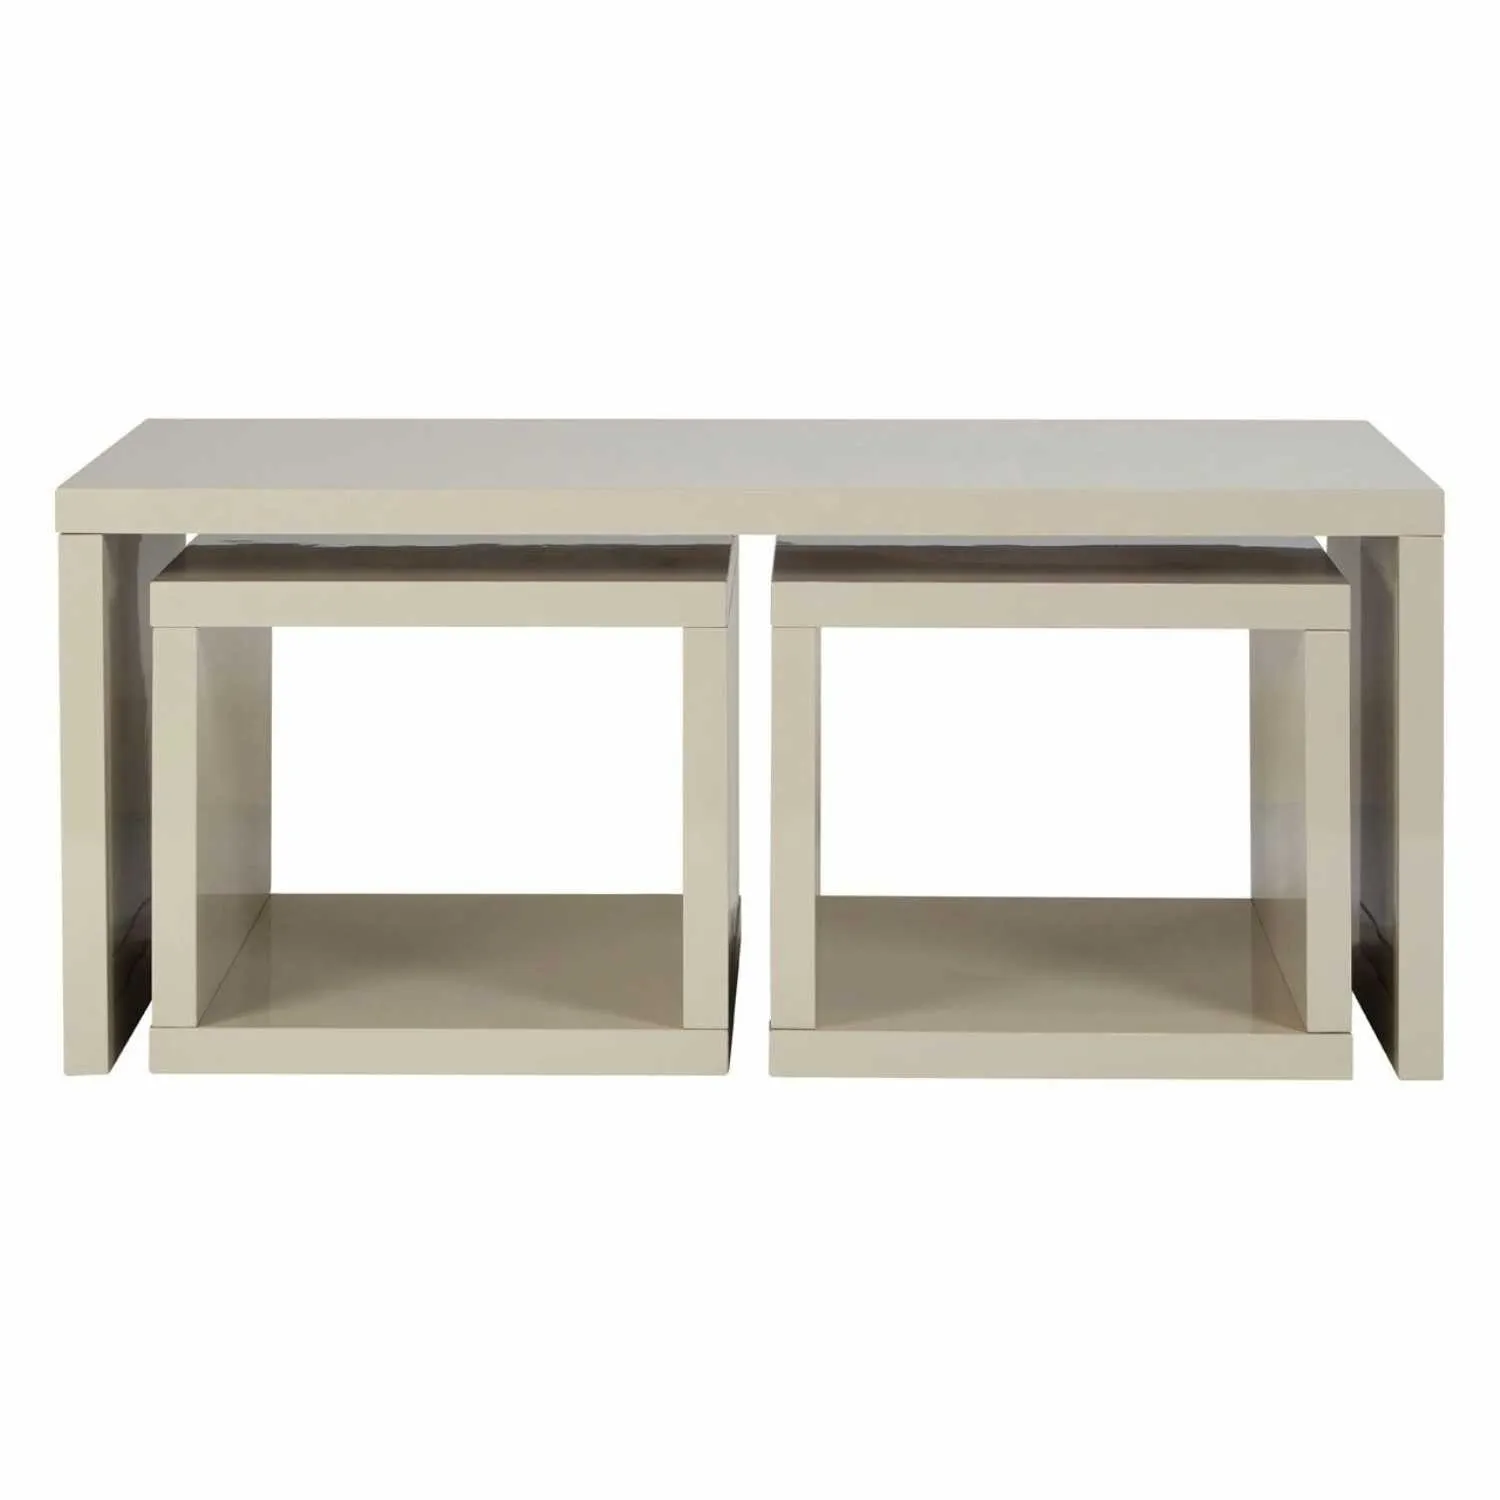 Modern Light Grey High Gloss Coffee Table With 2 Under Tables